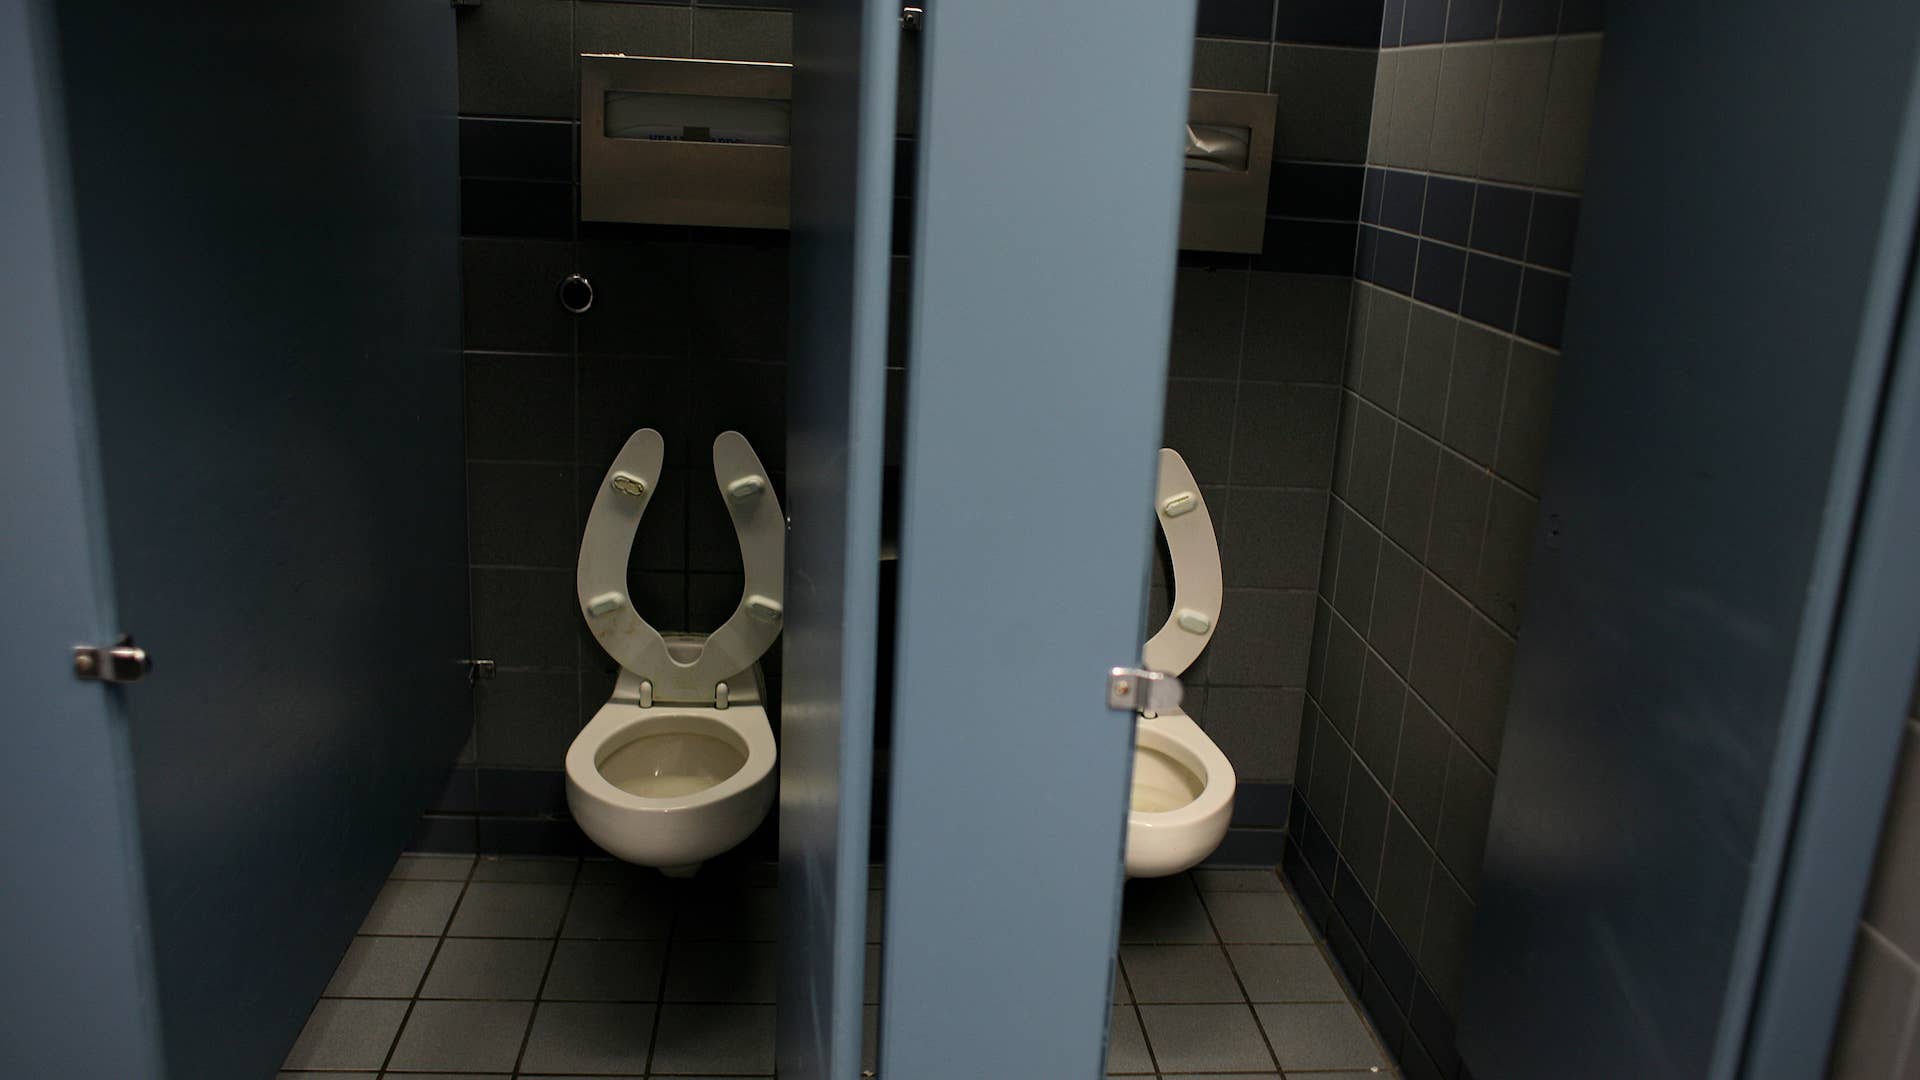 The exact toilet stall where republican Senator Larry Craig solicited anonymous gay sex.